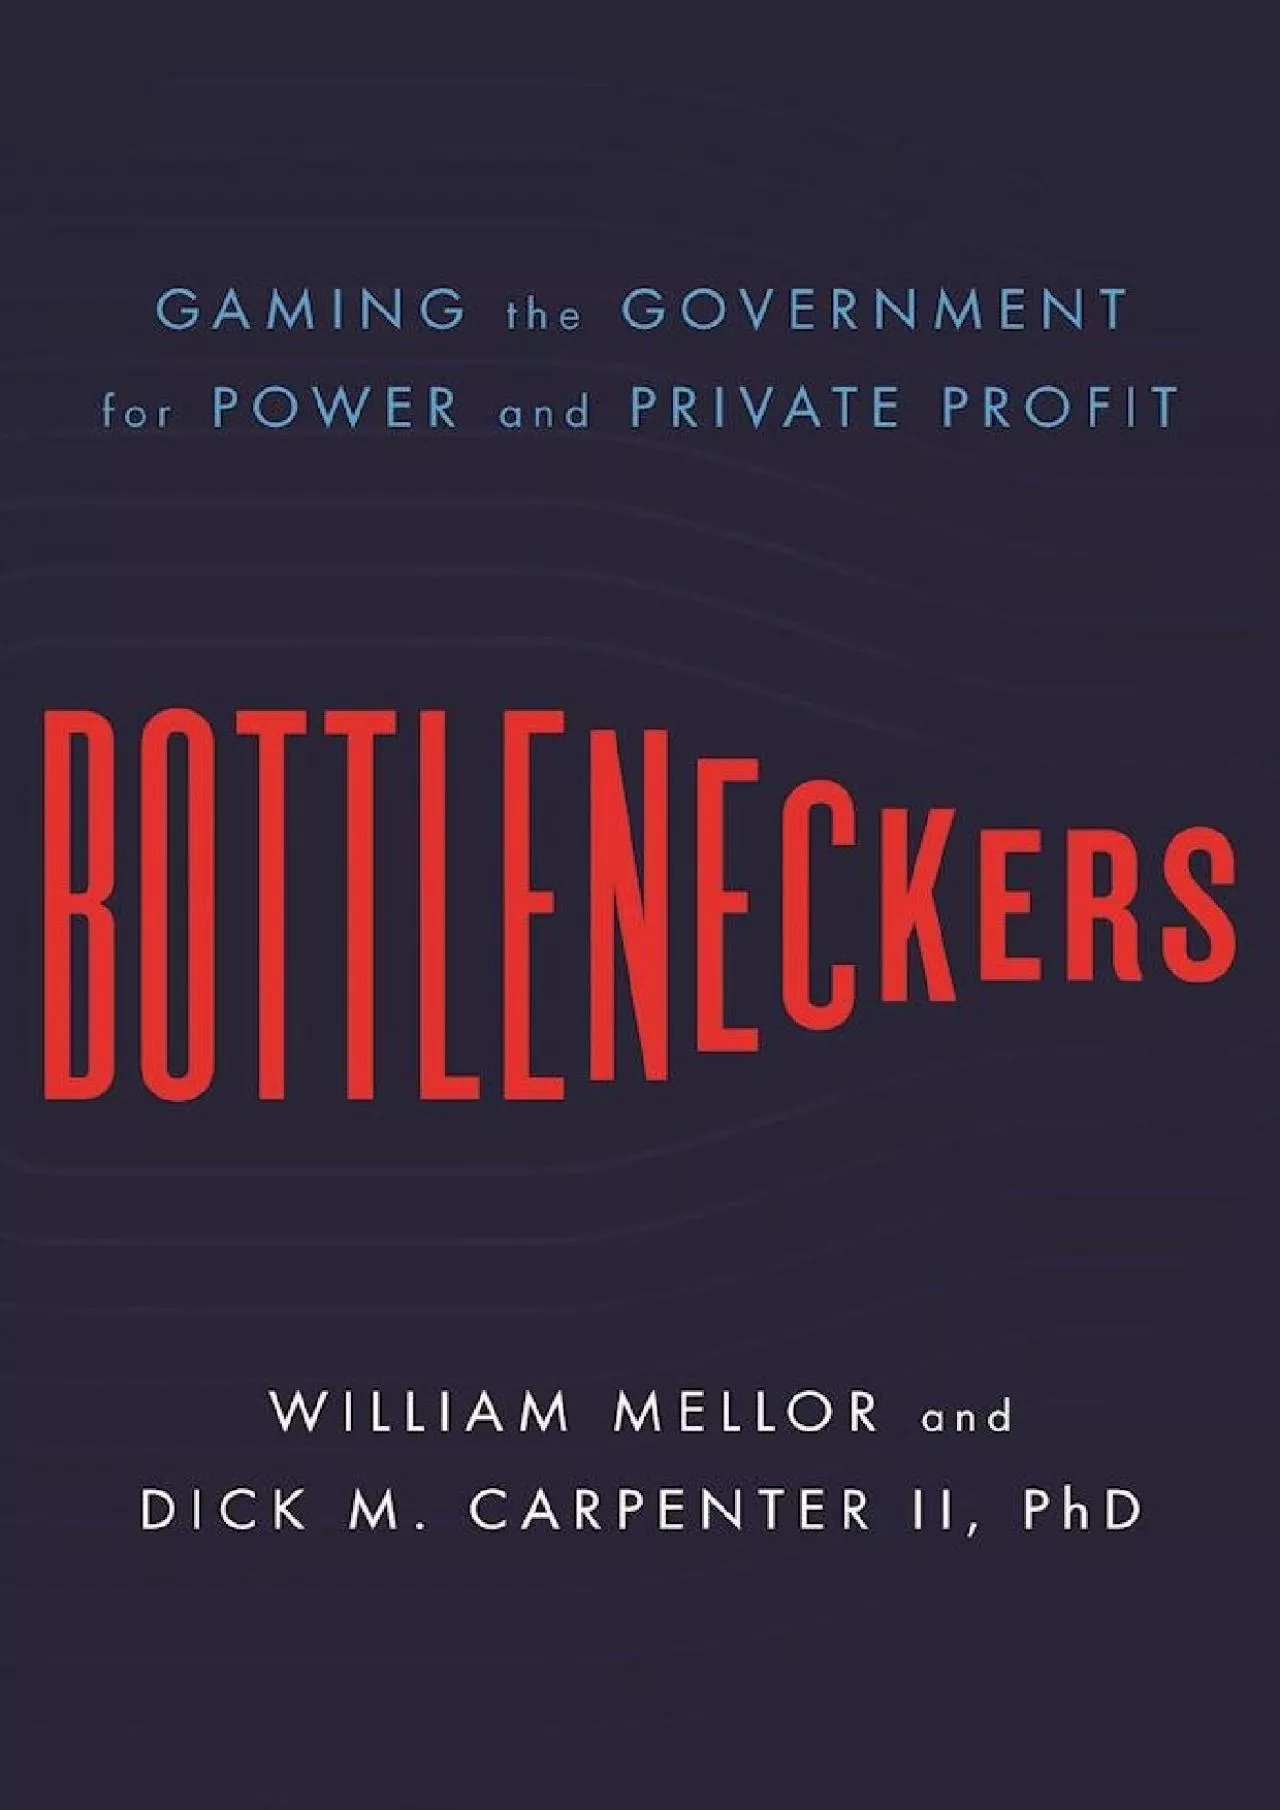 (DOWNLOAD)-Bottleneckers: Gaming the Government for Power and Private Profit